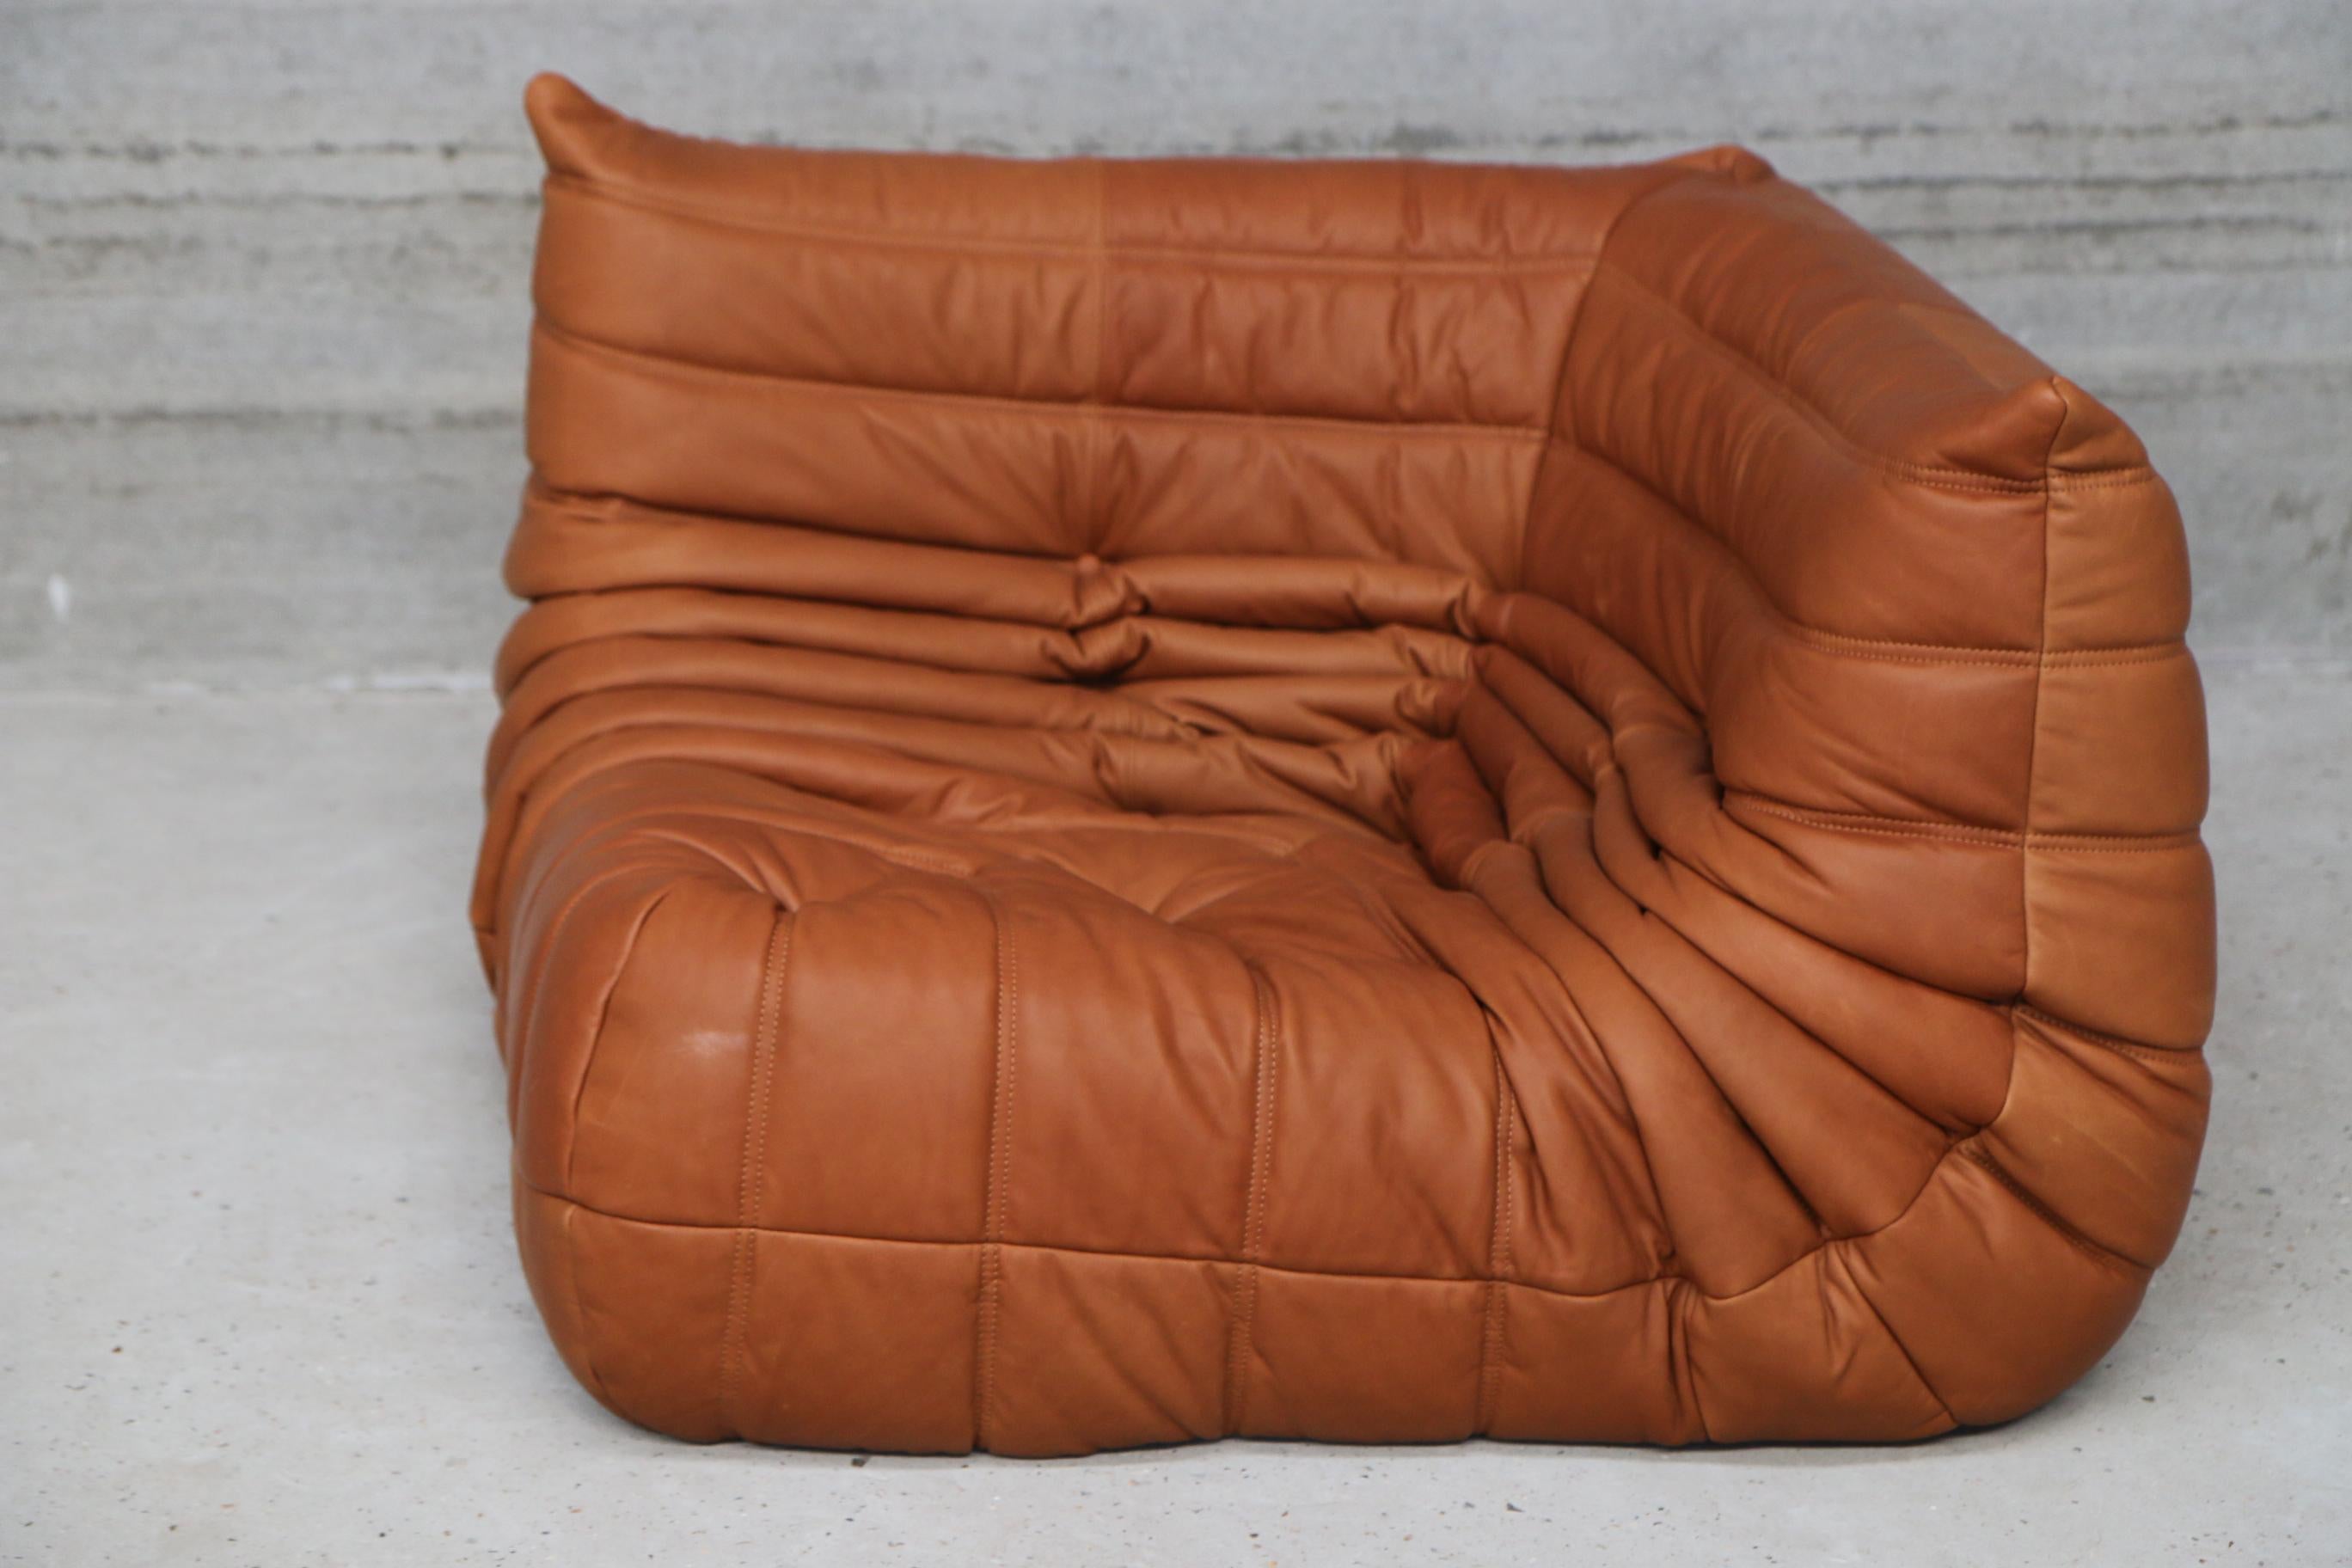 Iconic French vintage Corner Seat, beautifully reupholstered with our signature cognac leather.
Original genuine vintage 